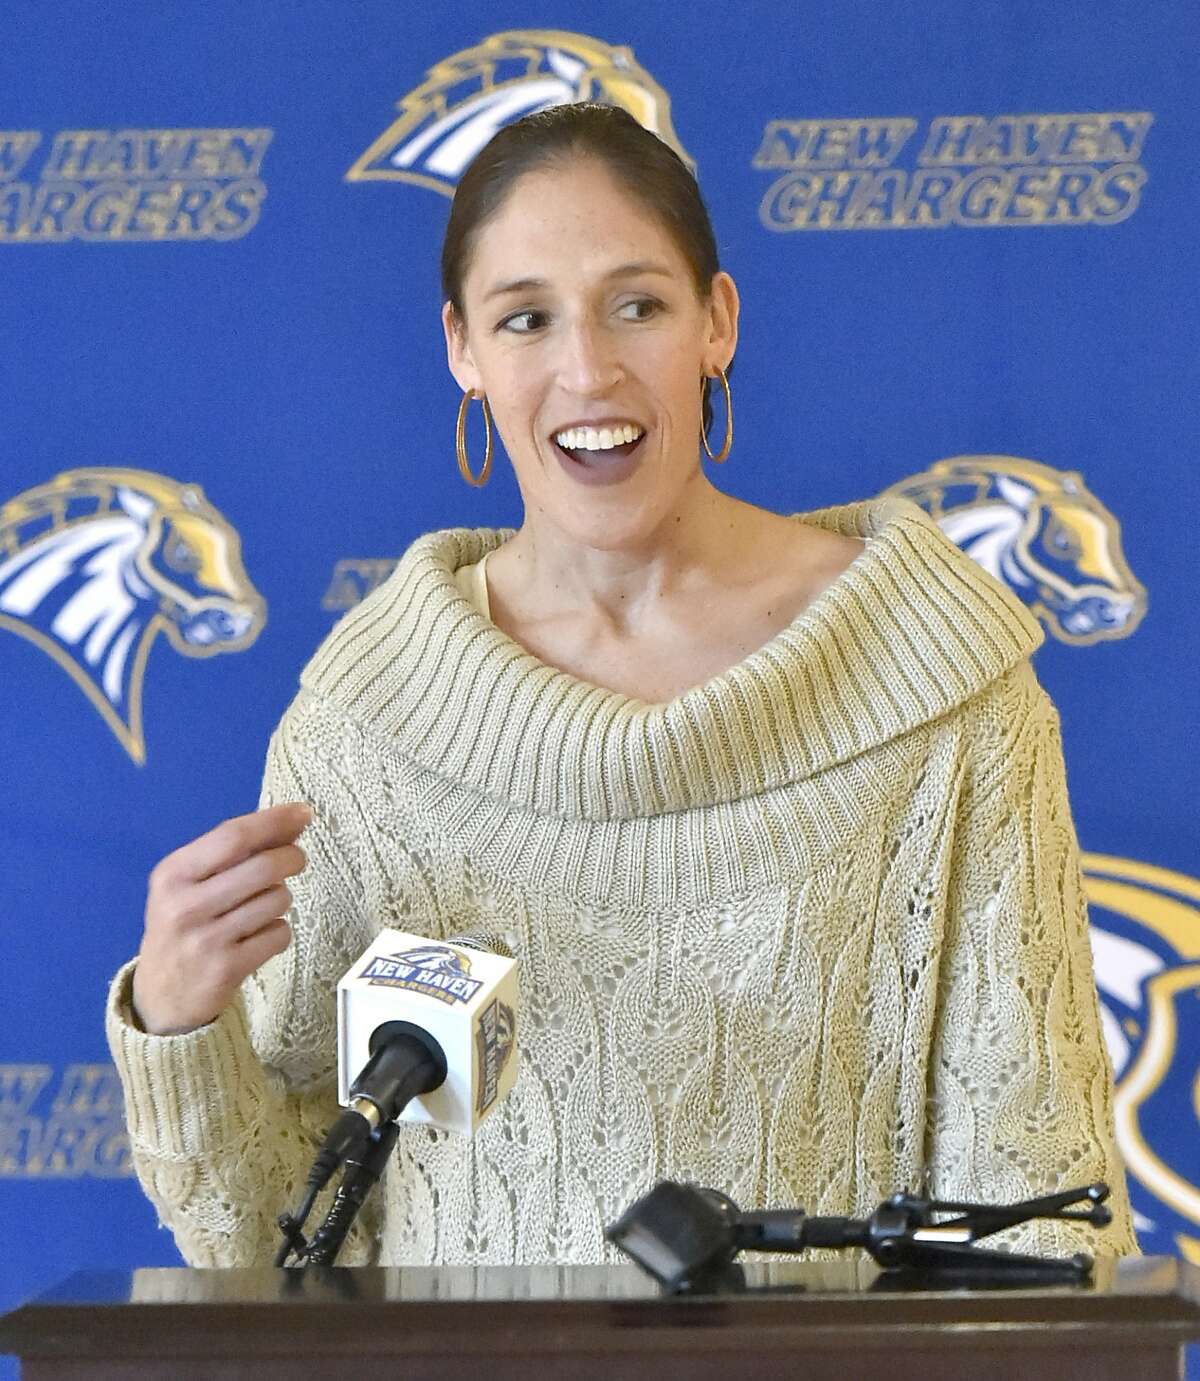 West Haven, Connecticut - Tuesday, December 10, 2019: Rebecca Lobo, former University of Connecticut Basketball player and the Hartford HealthCare Courage Award Ambassador, speaks during a ceremony honoring Chris Liggio, a University of New Haven Football player, who was presented with the Hartford HealthCare Connecticut Courage Award during a ceremony Tuesday at the University of New Haven in West Haven. The Hartford HealthCare Connecticut Courage Award is presented every month to two inspiring Connecticut college student-athletes who have demonstrated courage in the face of adversity.